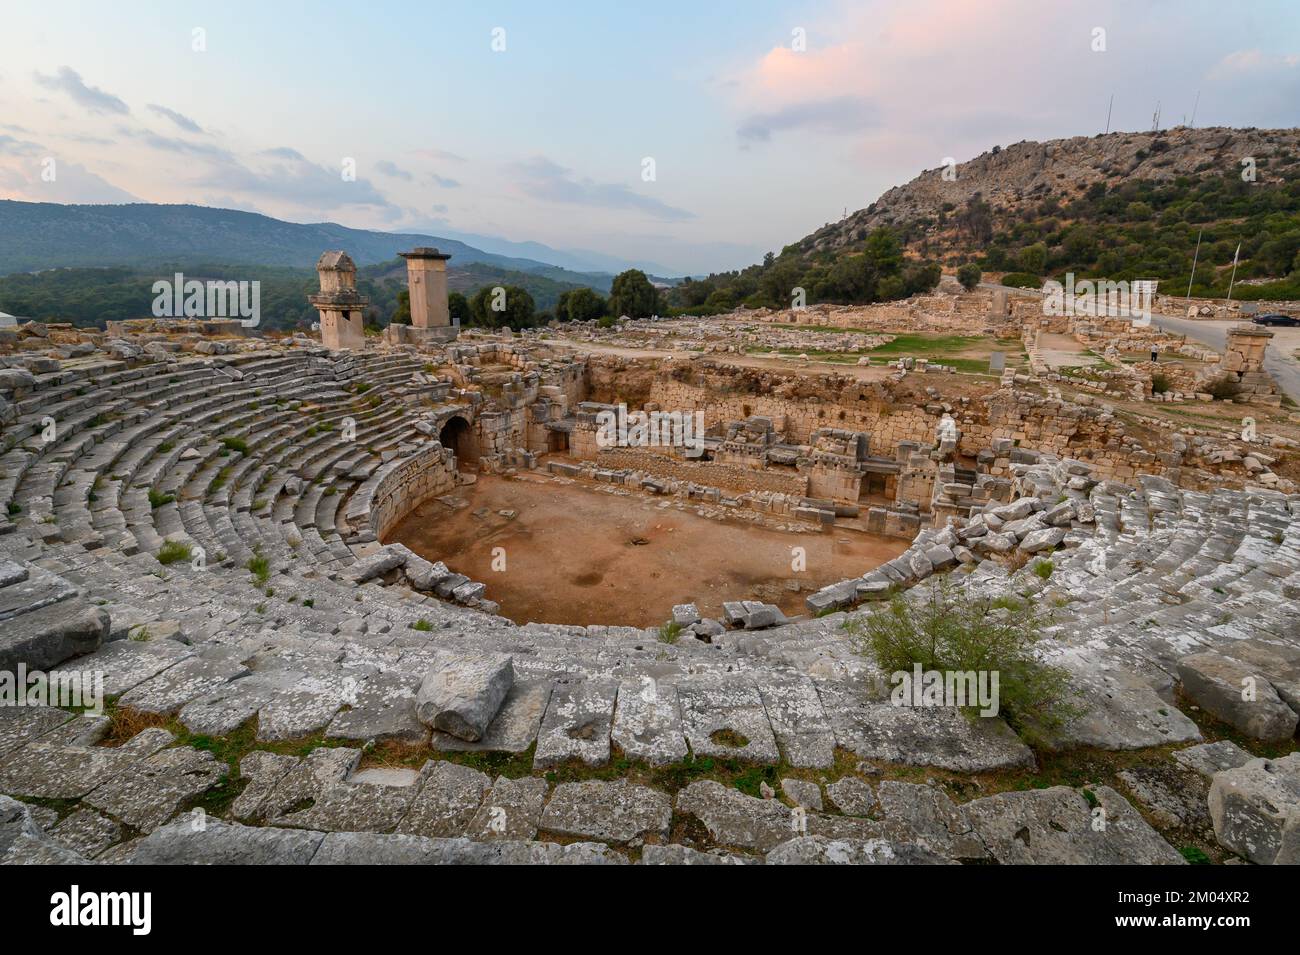 Xanthos Ancient City. Grave monument and the ruins of ancient city of Xanthos - Letoon in Kas, Antalya, Turkey at sunset. Capital of Lycia. Stock Photo